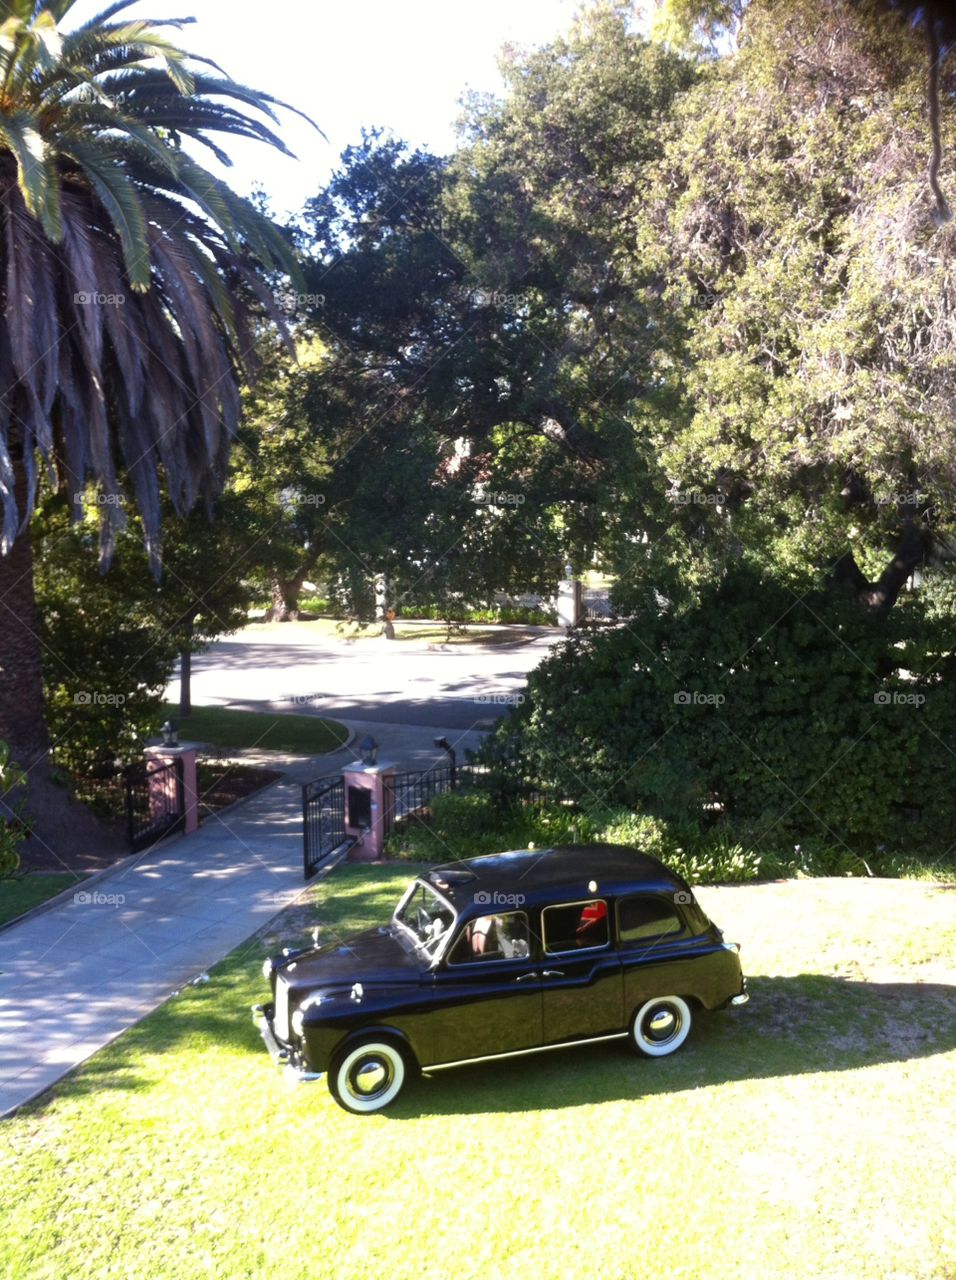 London taxi cab in front yard Usa 